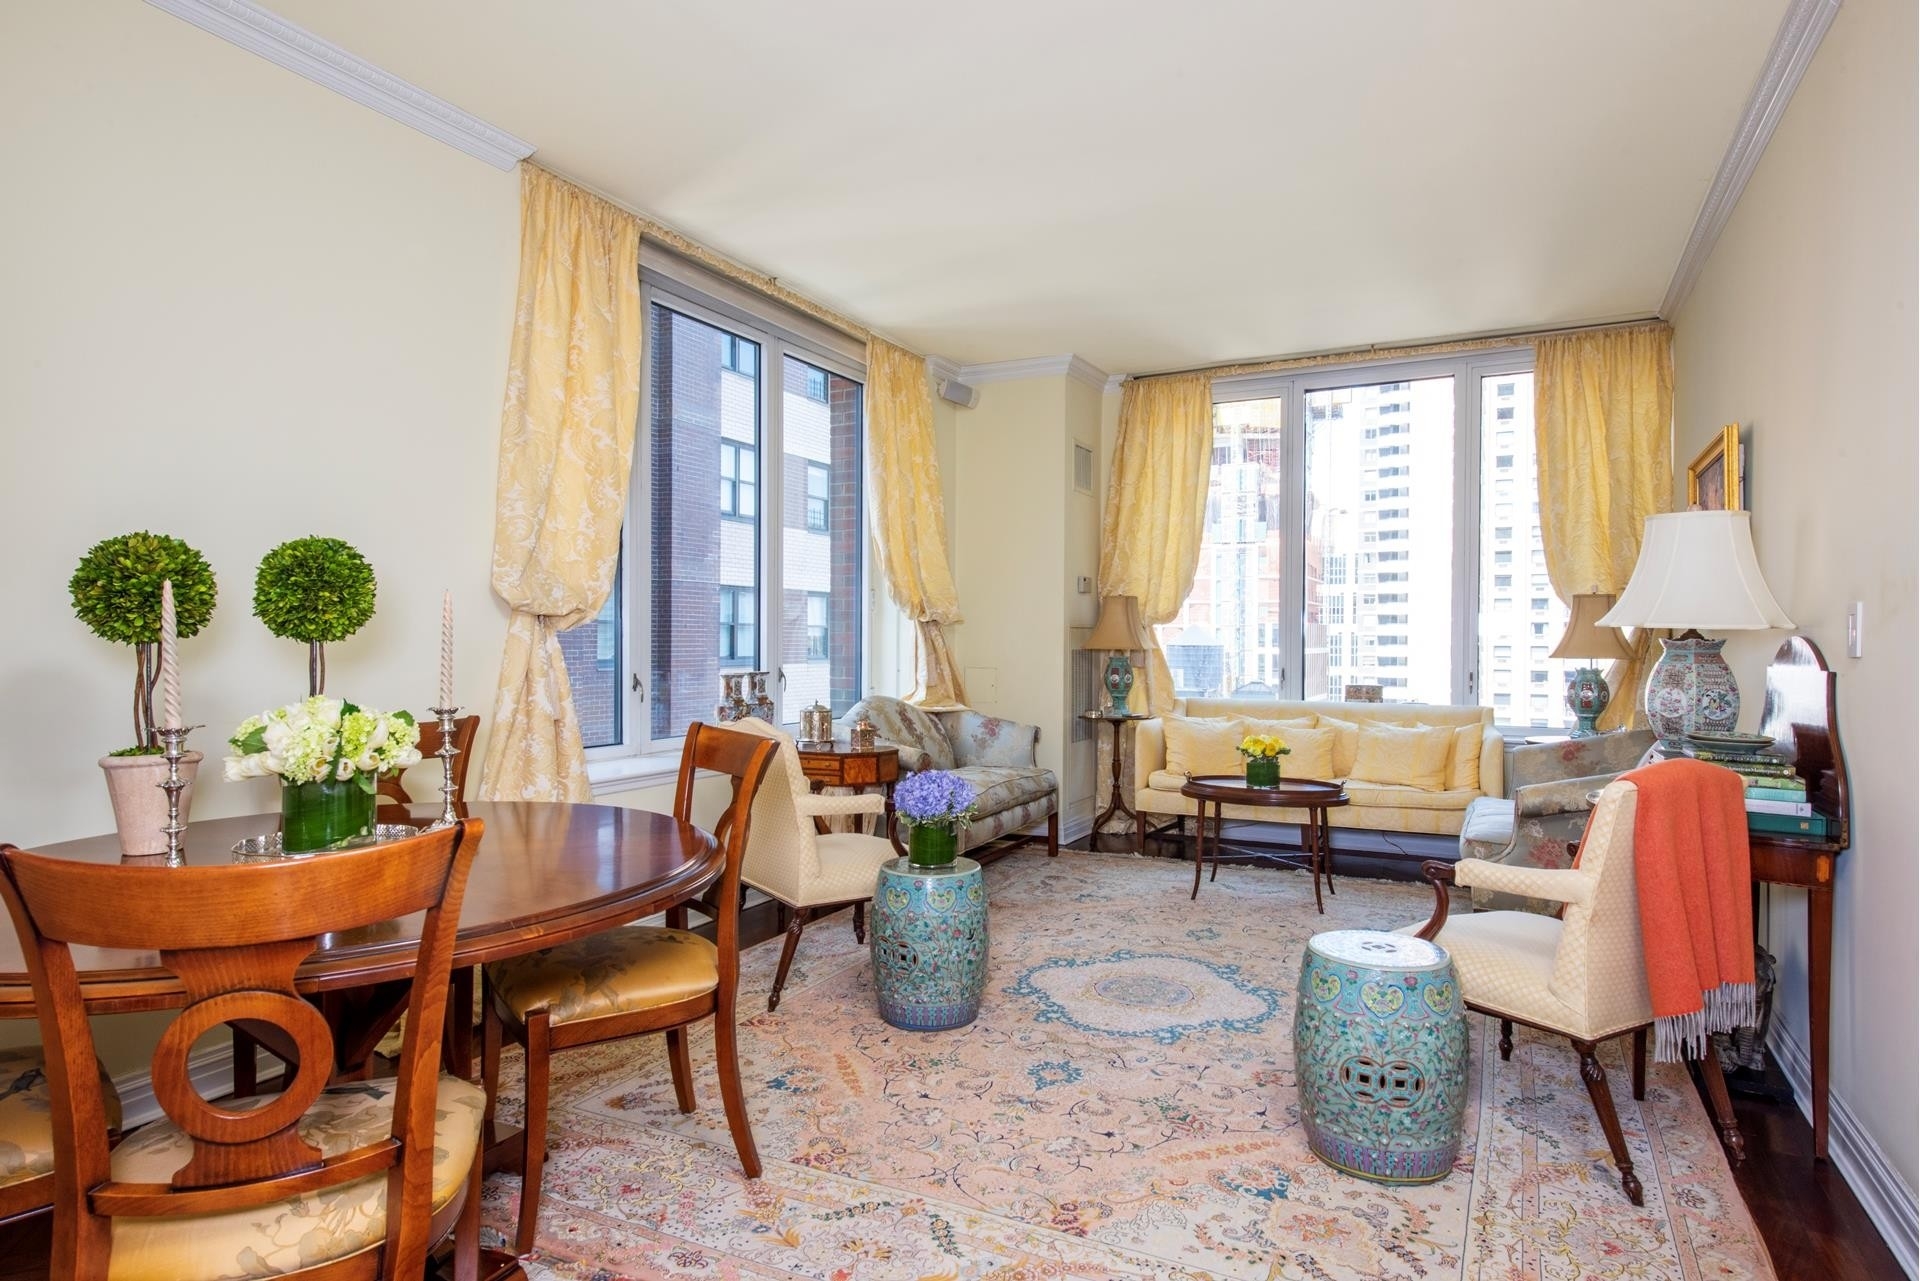 Condominium for Sale at The Park Laurel, 15 W 63RD ST, 12B Lincoln Square, New York, New York 10023